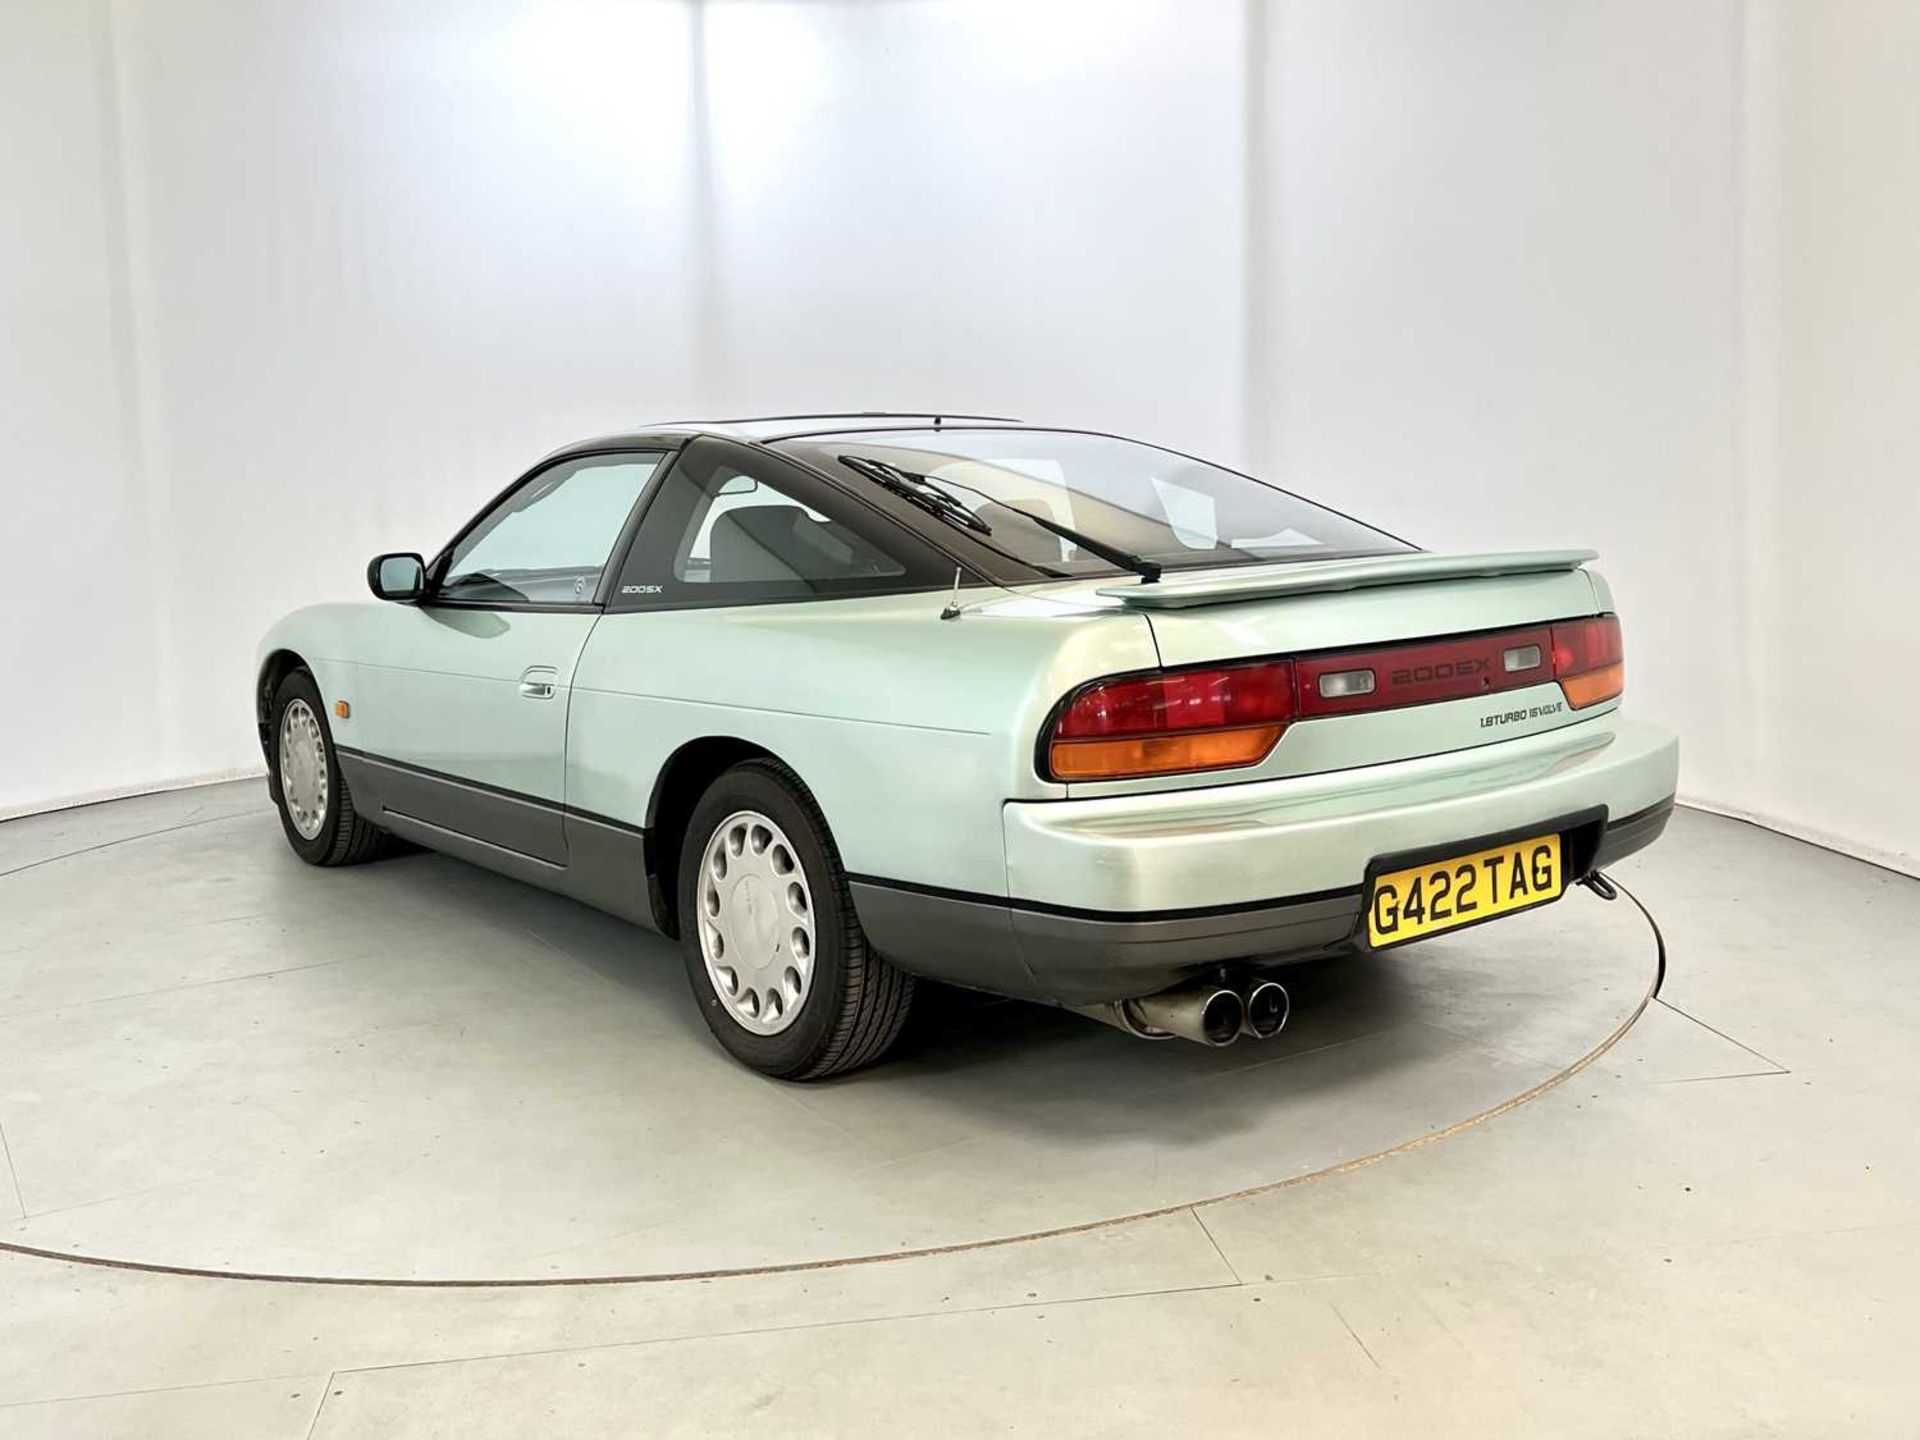 1990 Nissan 200SX - Image 7 of 30